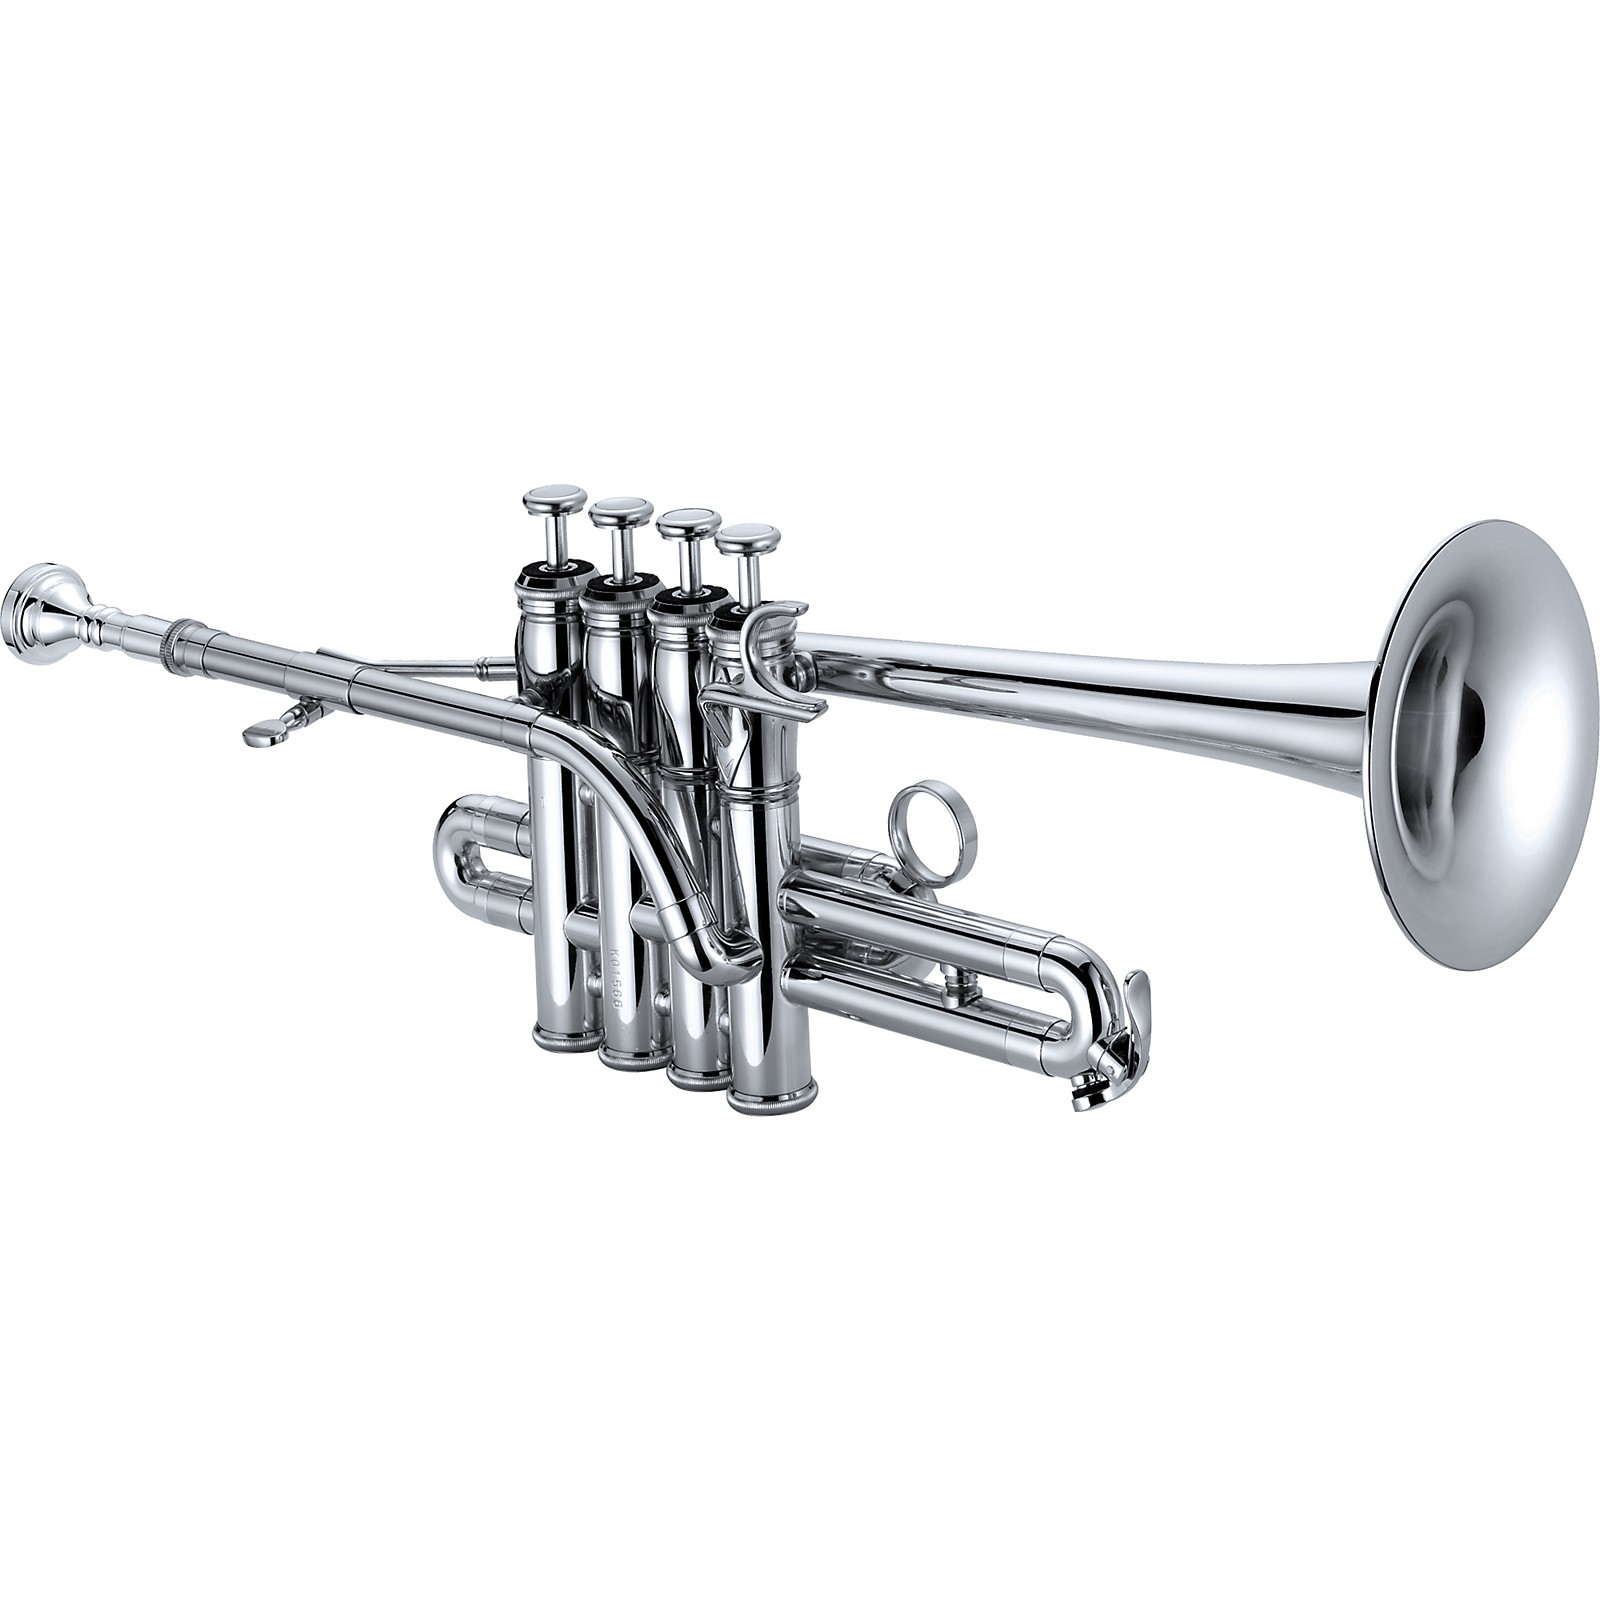 The Piccolo Trumpet - Ideal for high notes